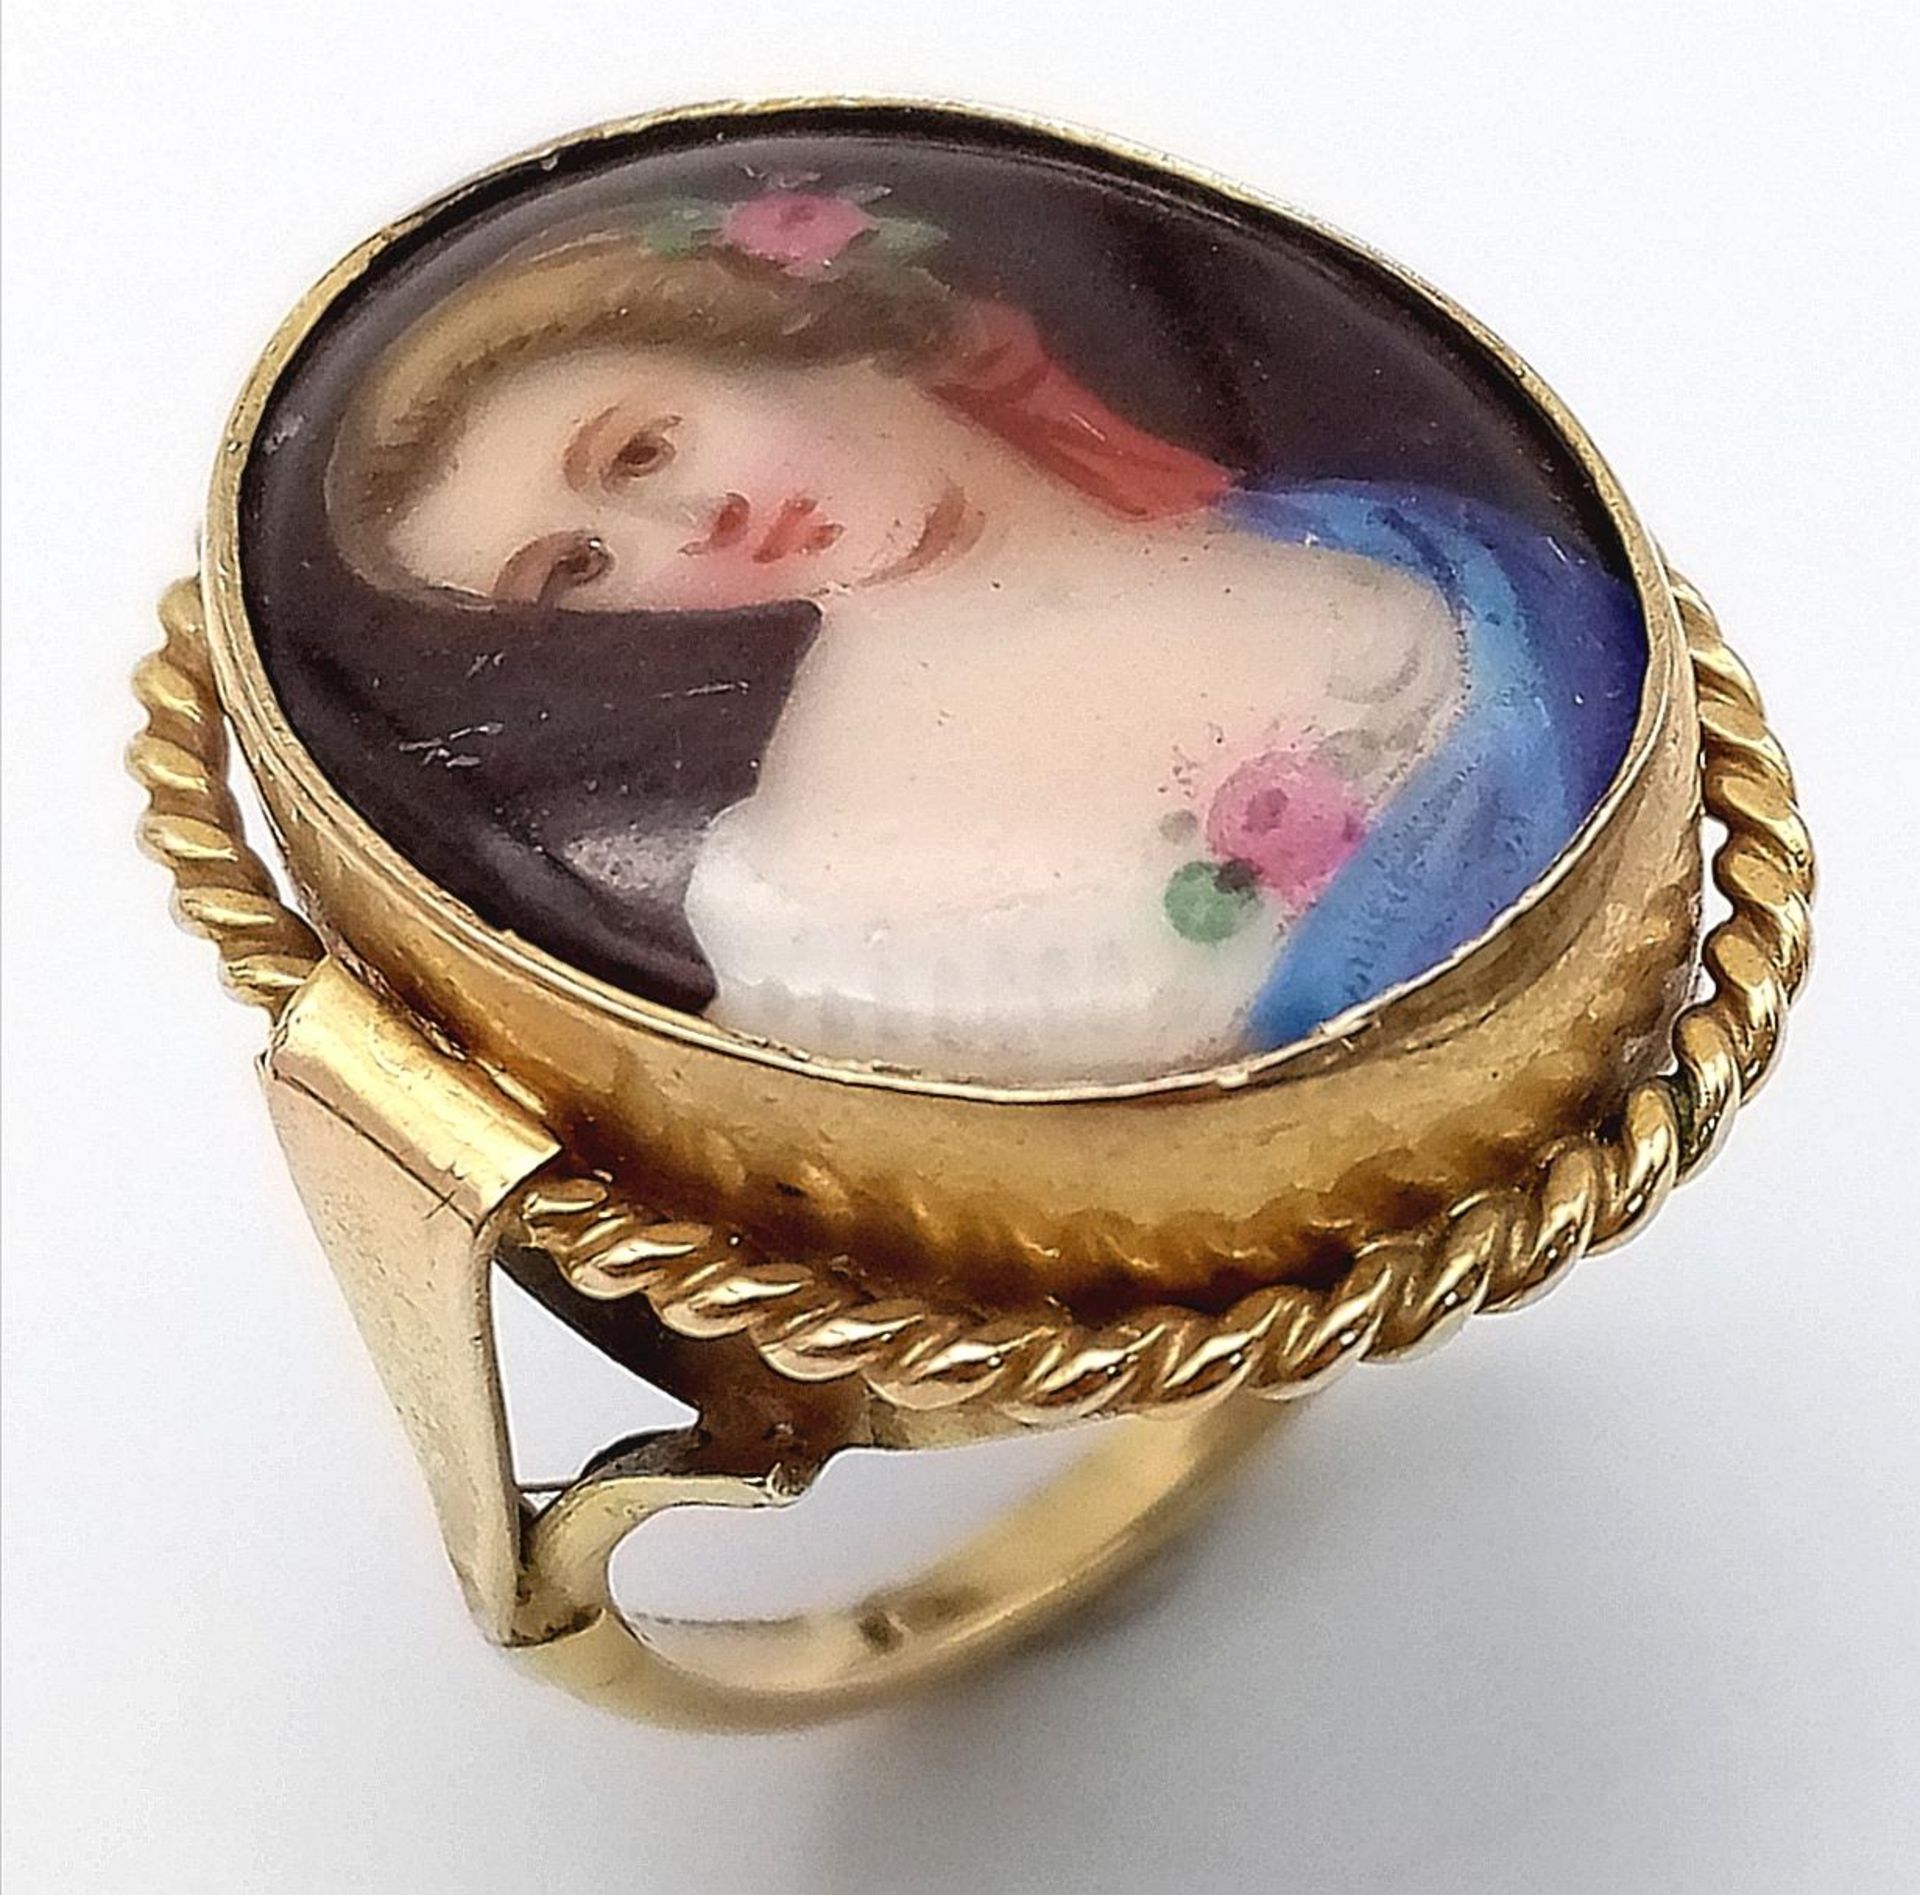 A Wonderful Antique 9K Yellow Gold Portrait Ring. Centre-piece of a hand-painted portrait of a